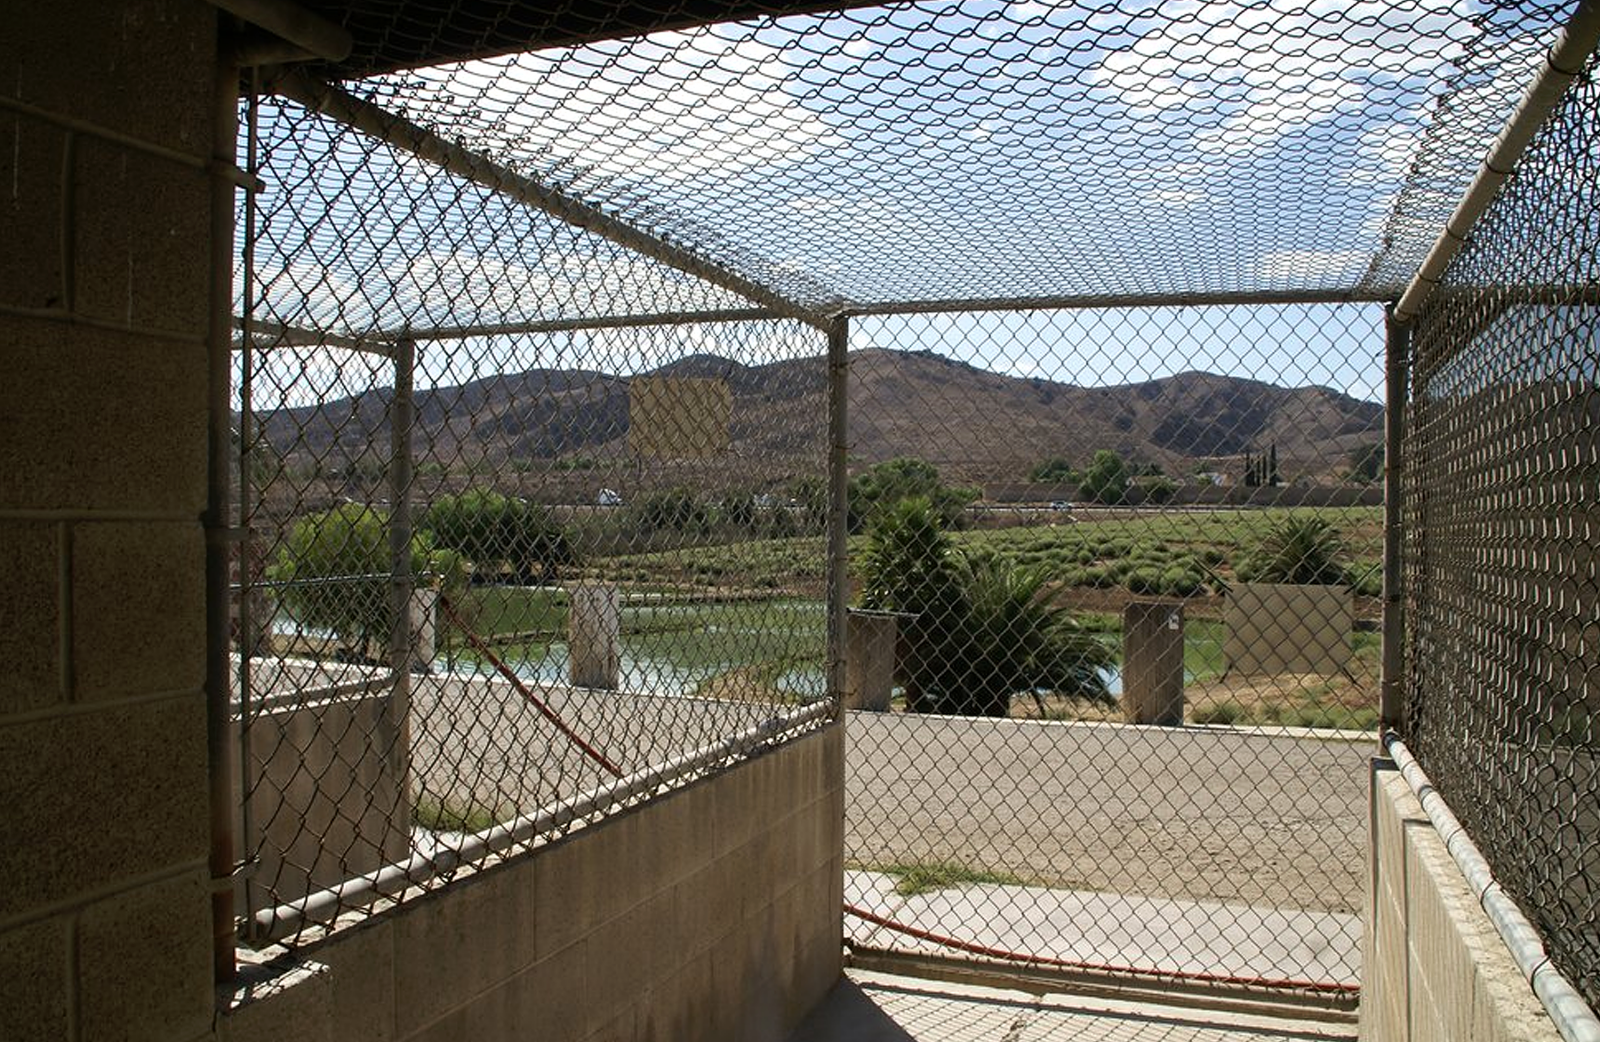 Inside view of the Prado dog park kennel overlooking grass and mountains in the background.